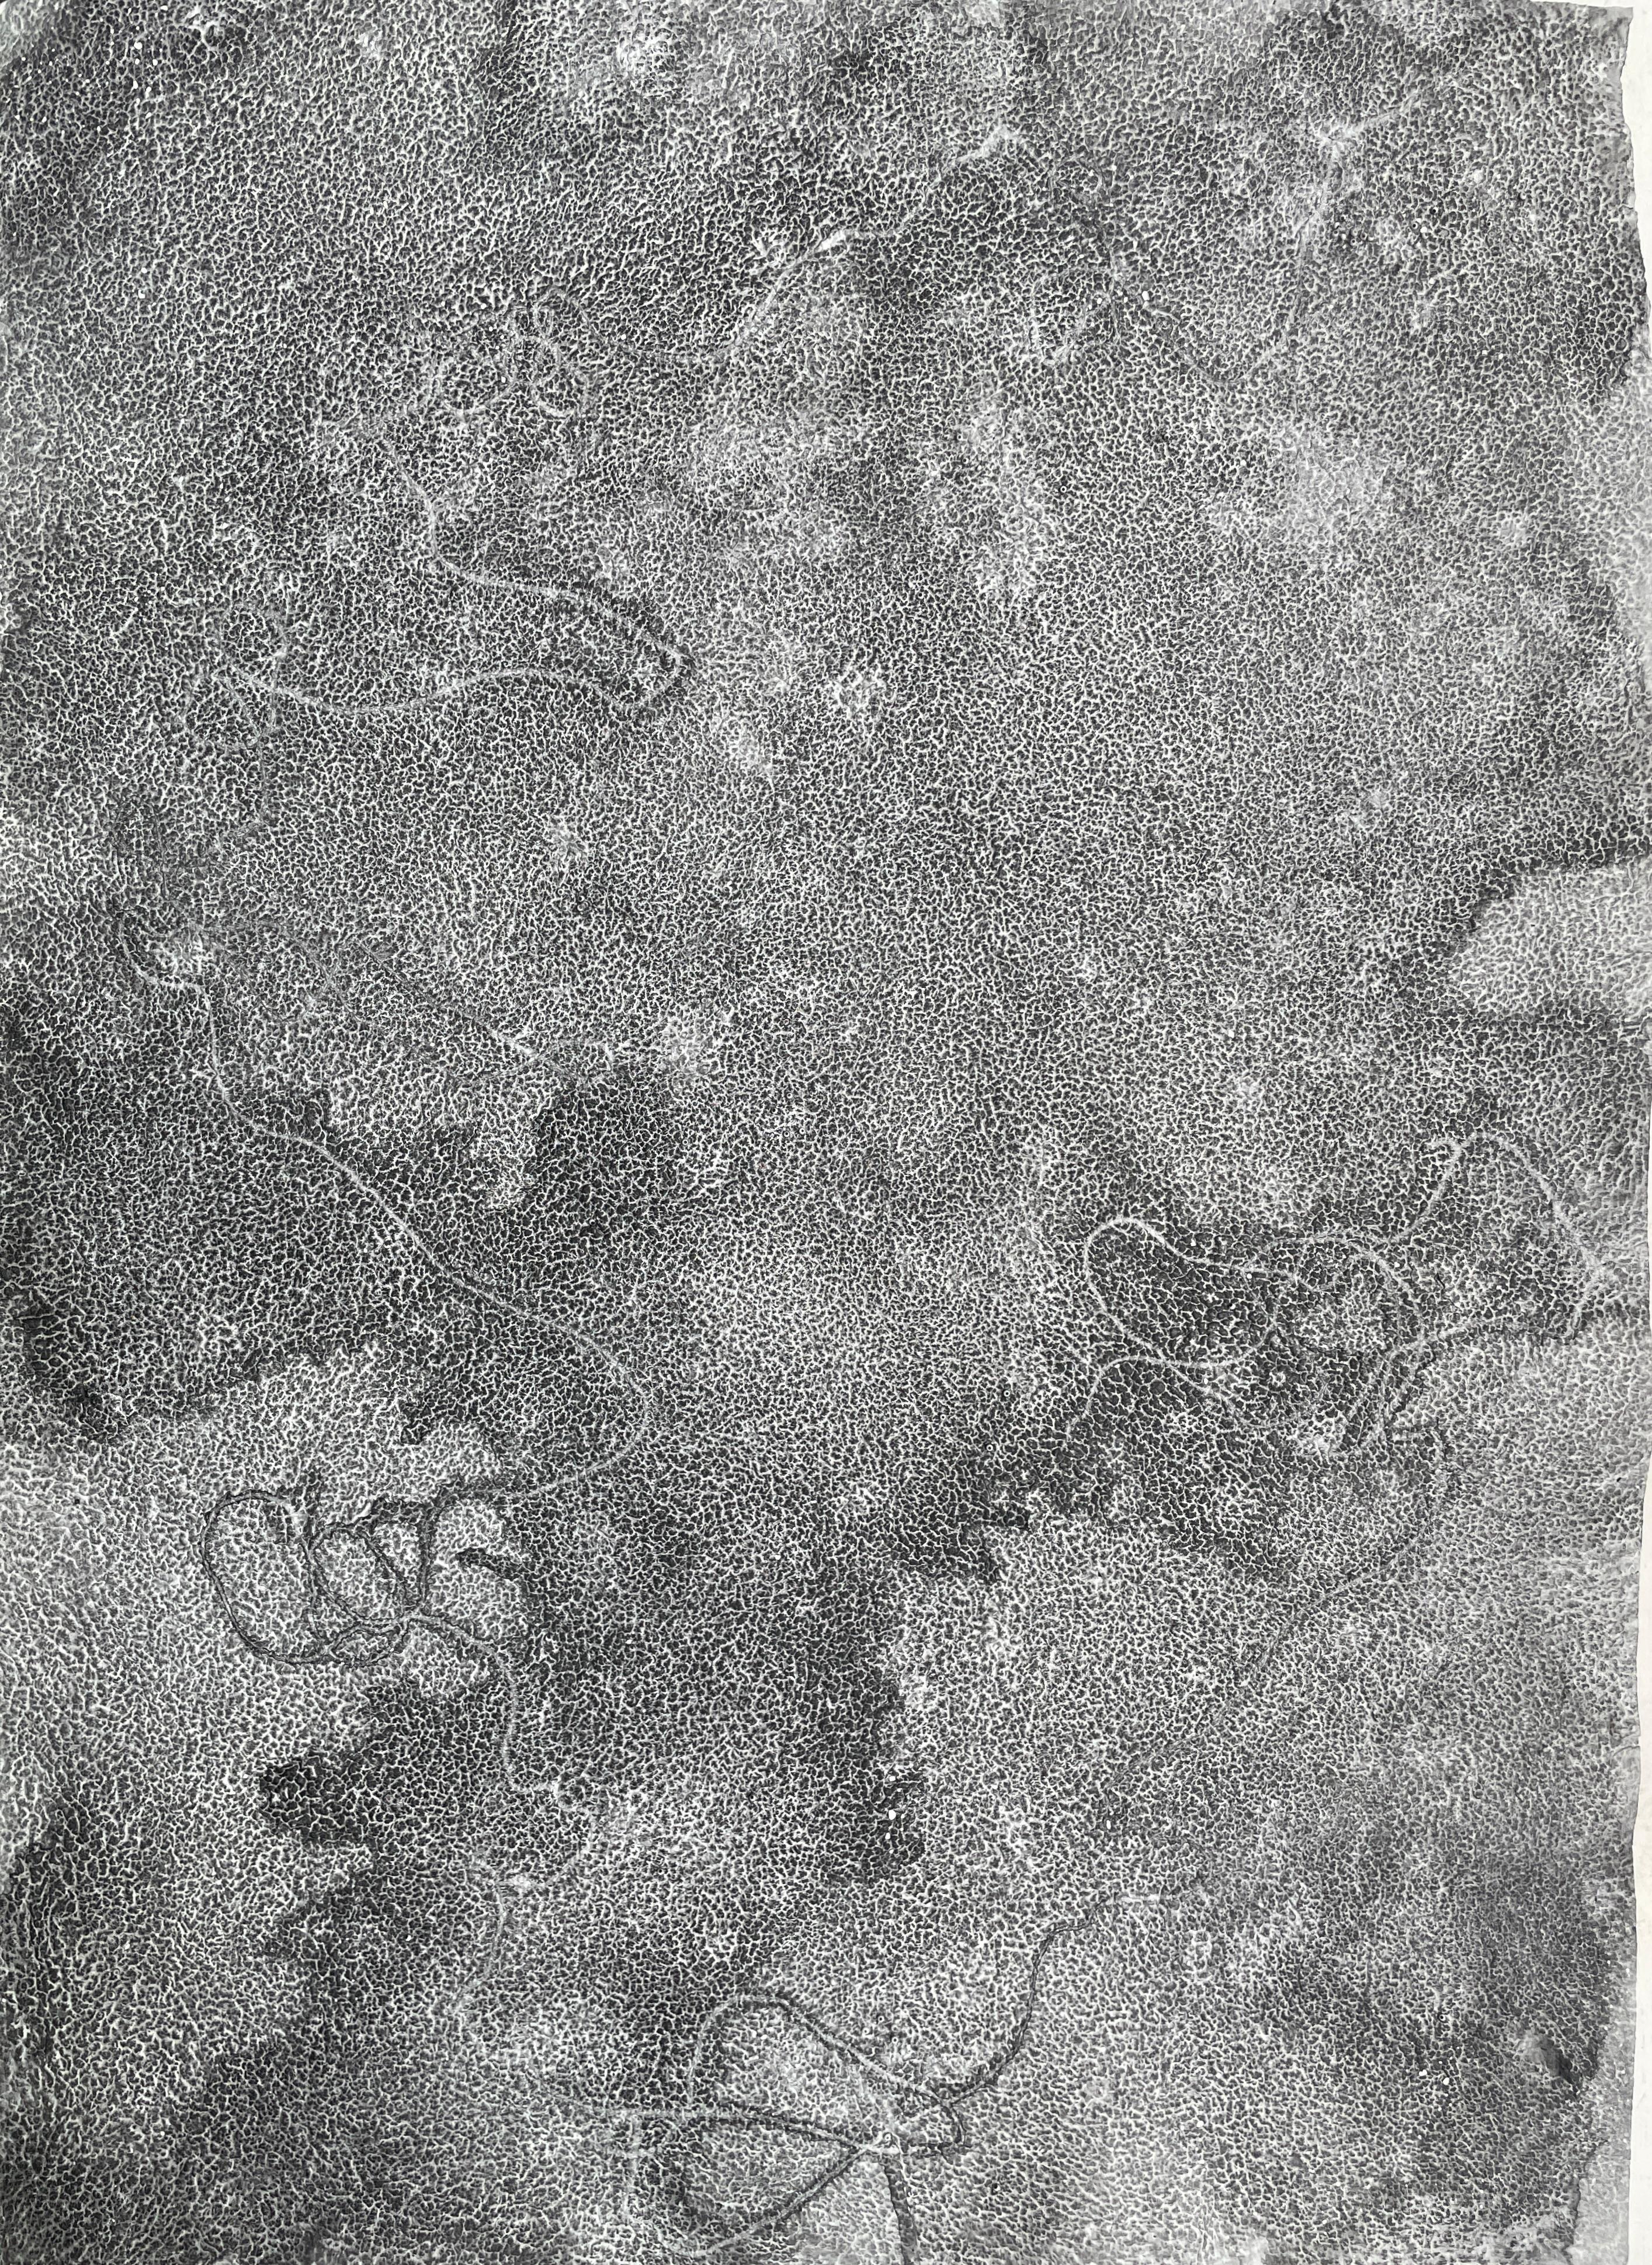 Antonio Puri Abstract Painting - Cincuenta 1: sumi ink painting on handmade paper from India: gray, black & white